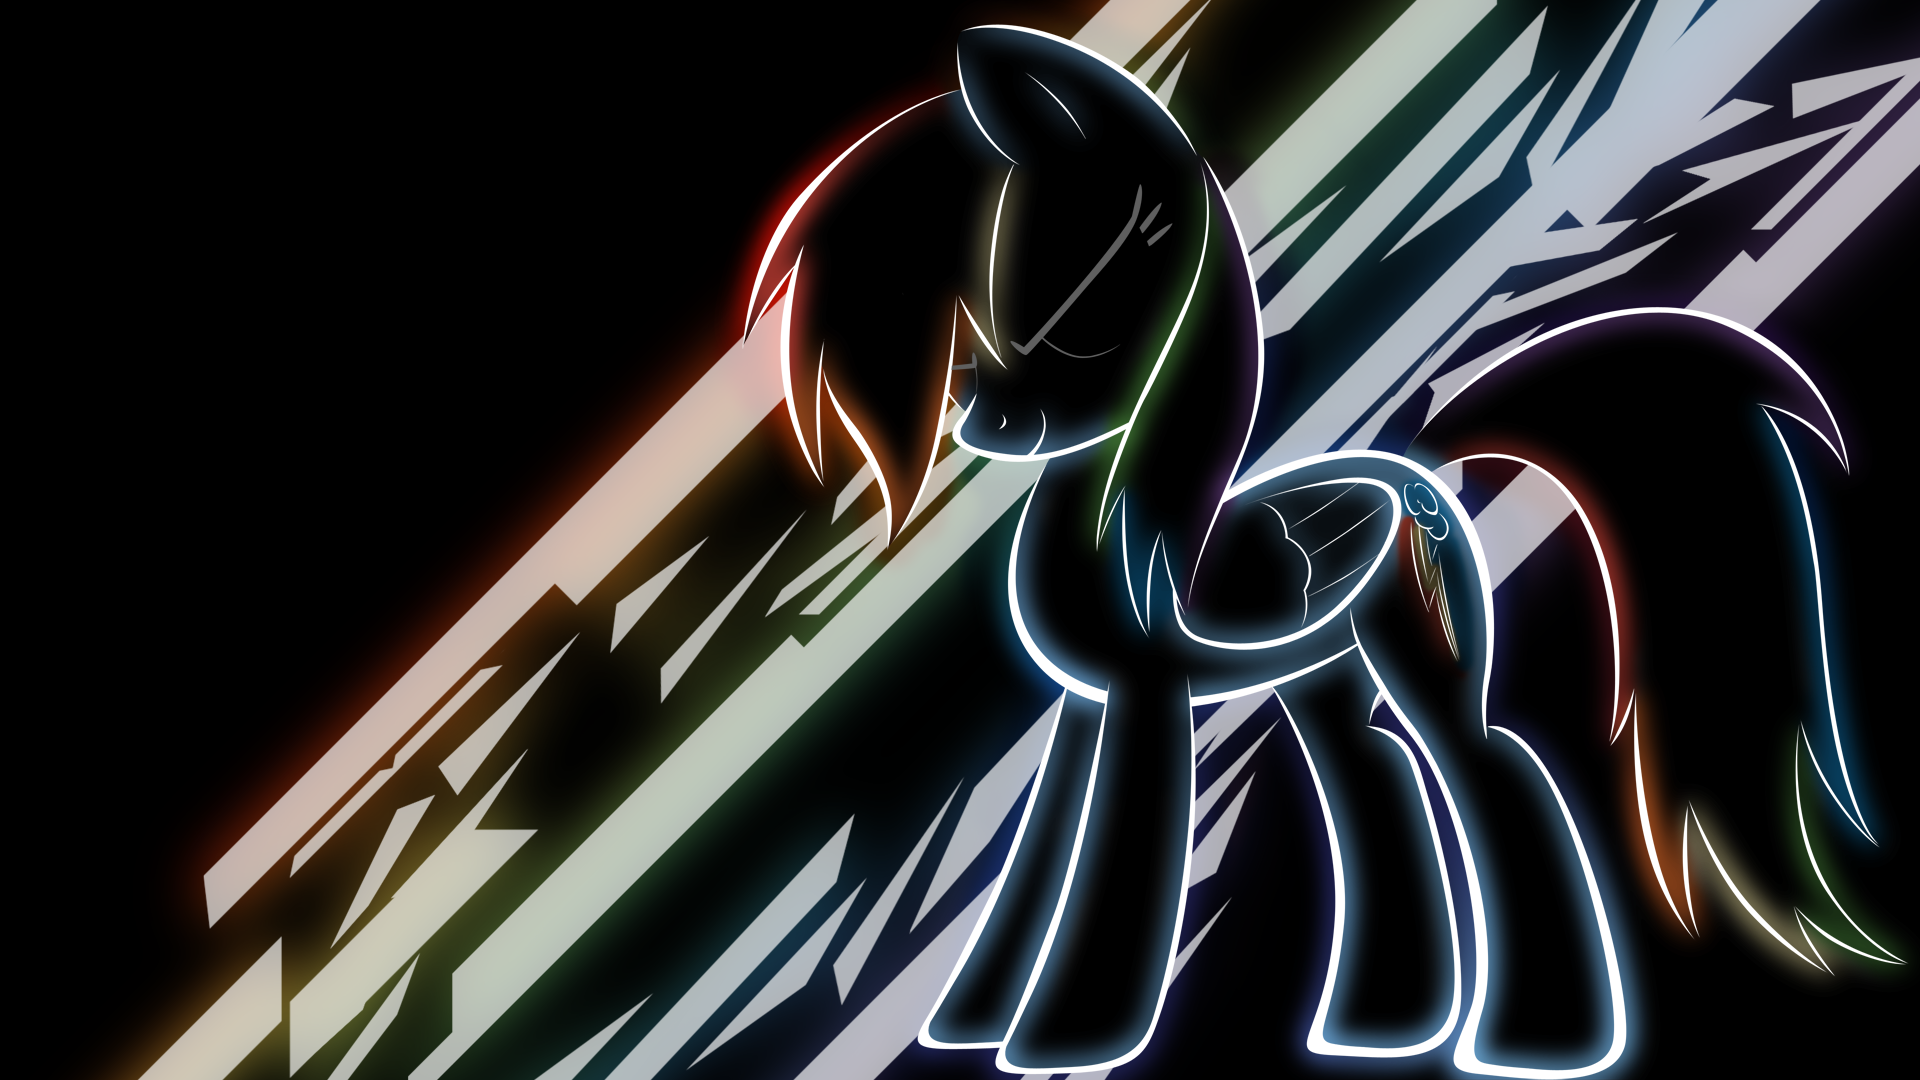 Wallpaper. Brony.com. T Shirts And Apparel For Bronies And Fans